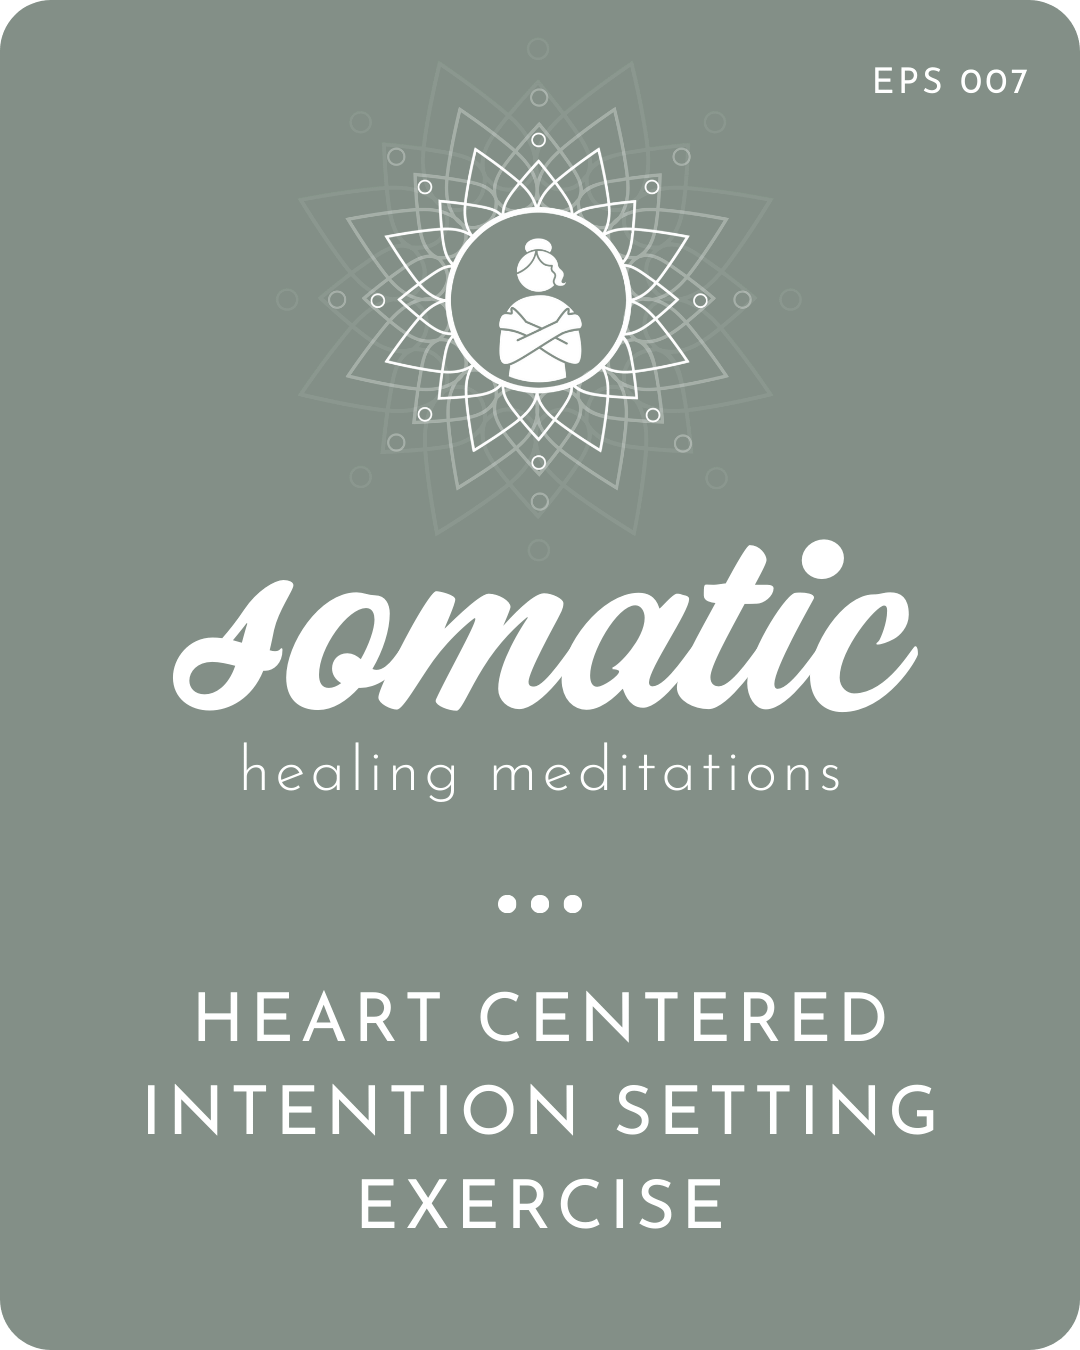 Heart Centered Intention Setting Exercise